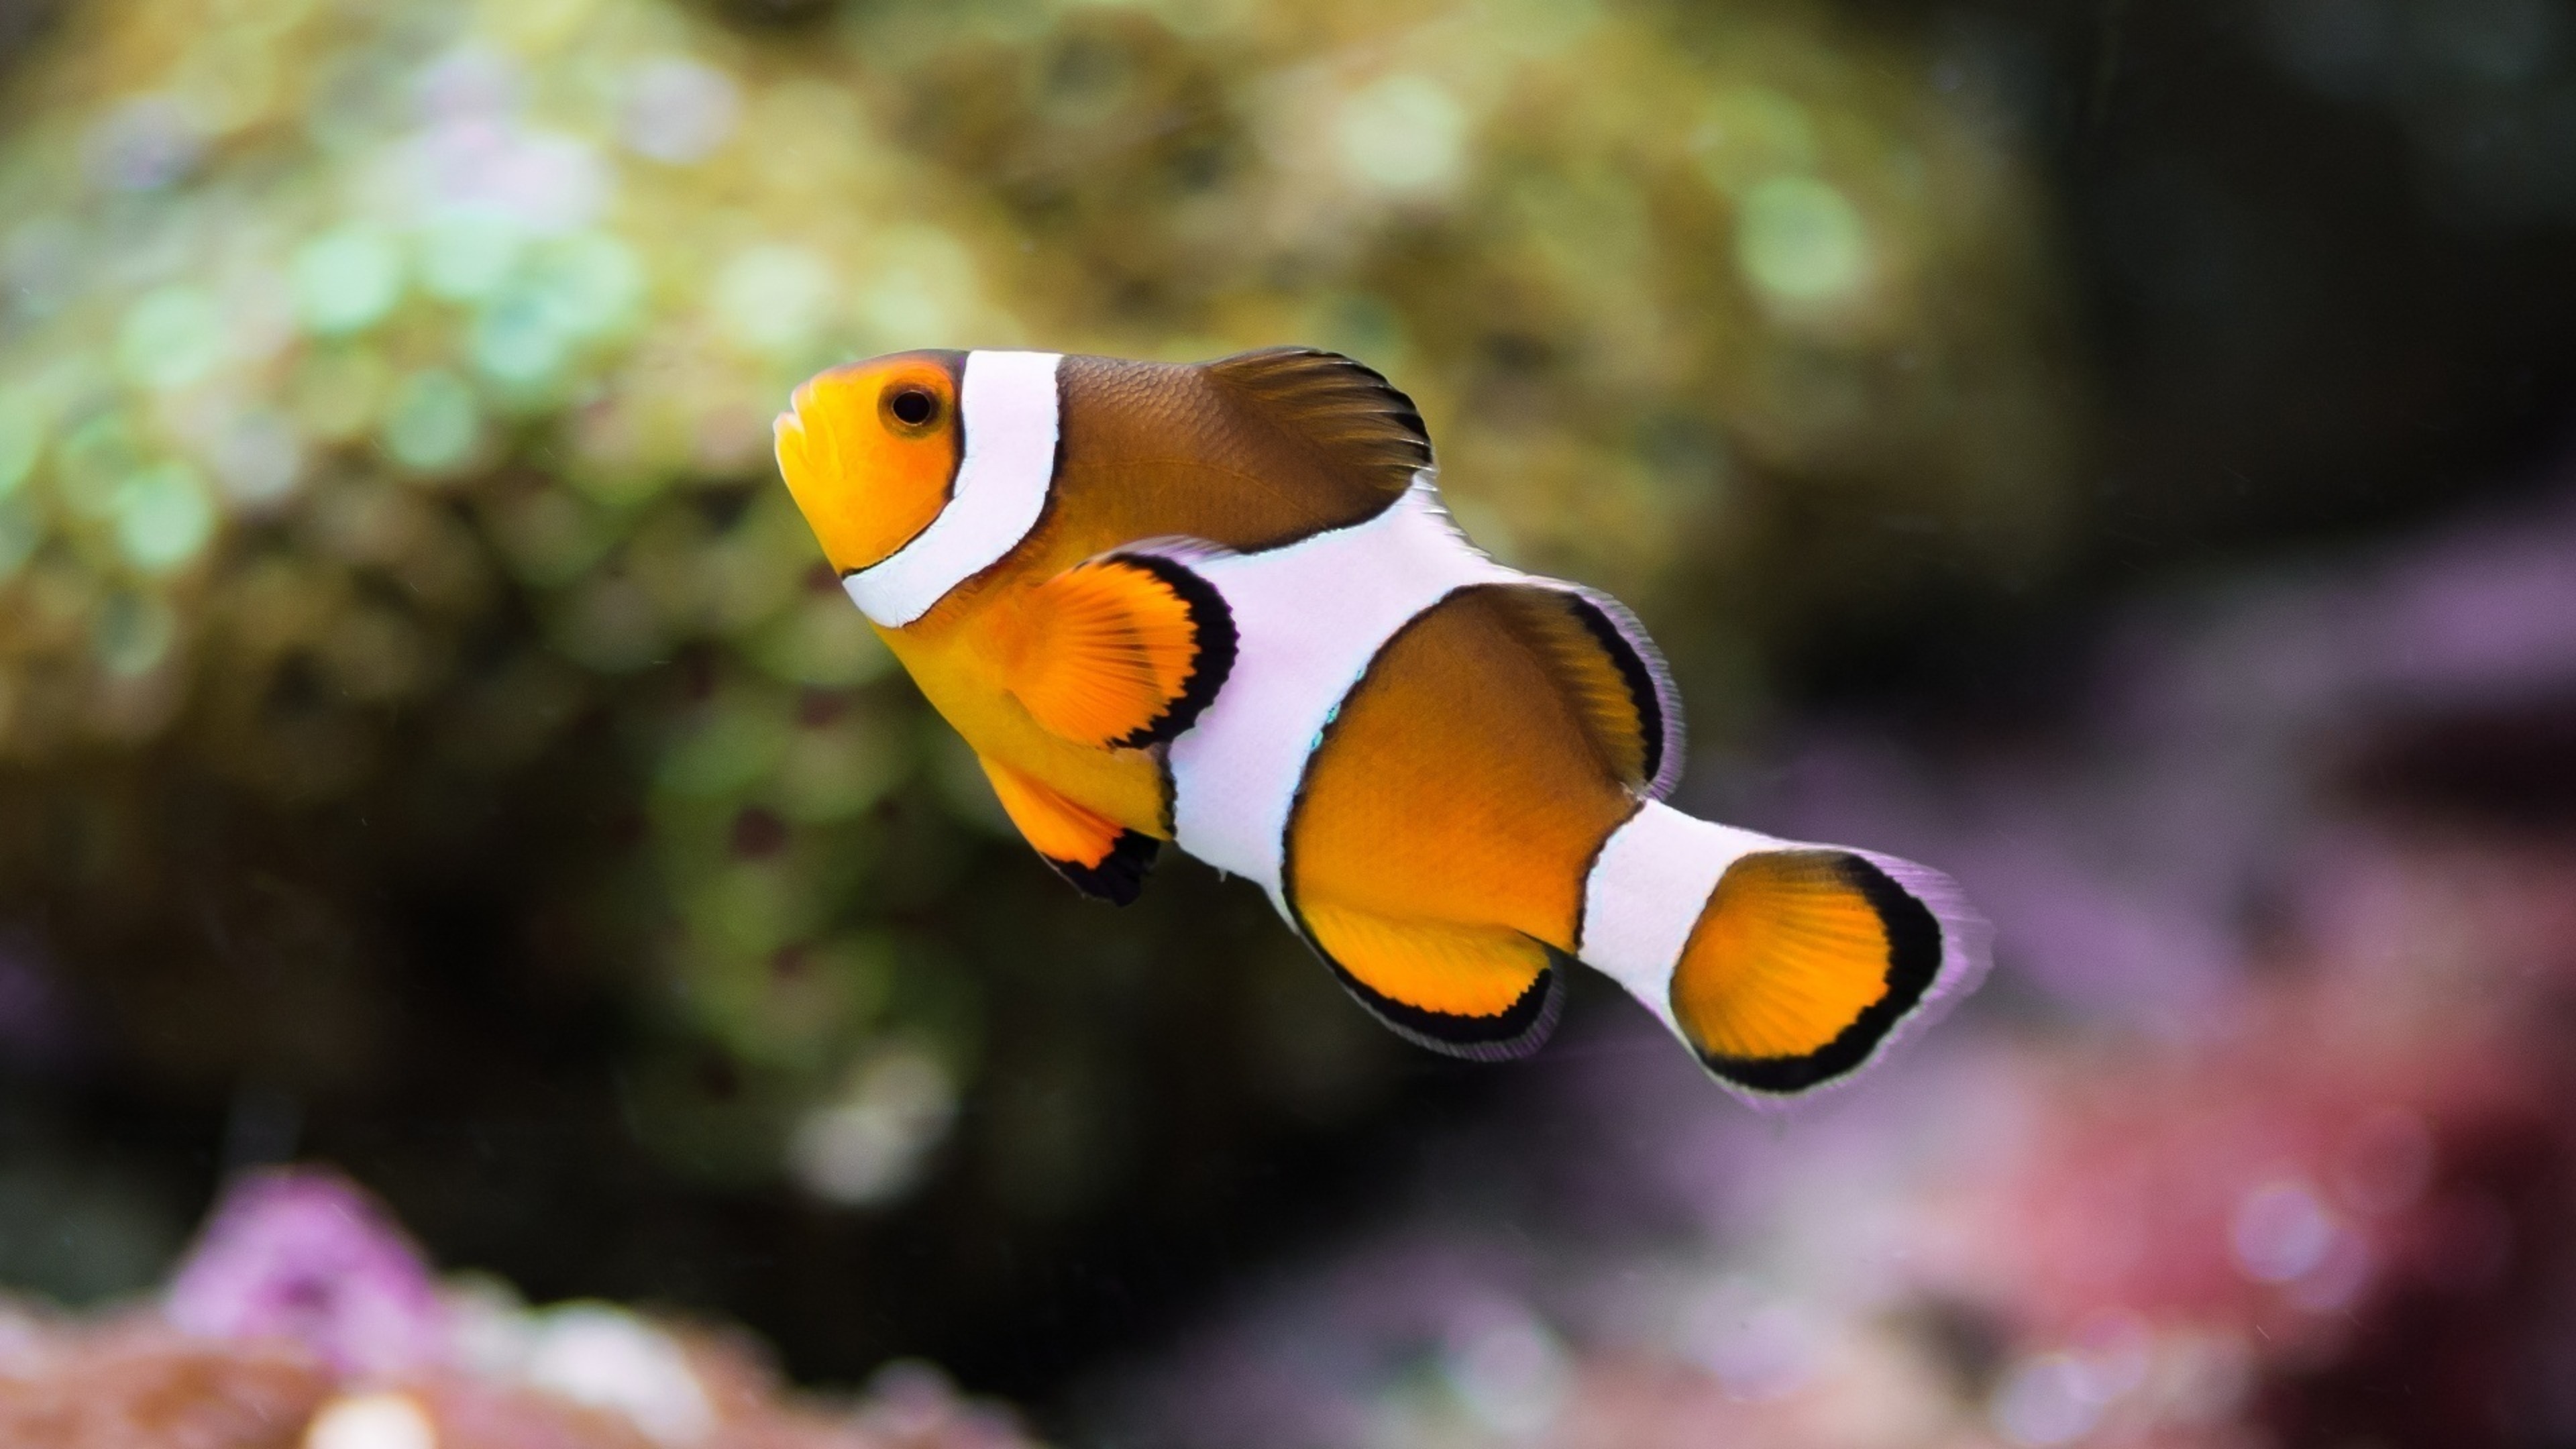 Clown Fish: Anemonefish, Fishes from the subfamily Amphiprioninae. 3840x2160 4K Wallpaper.